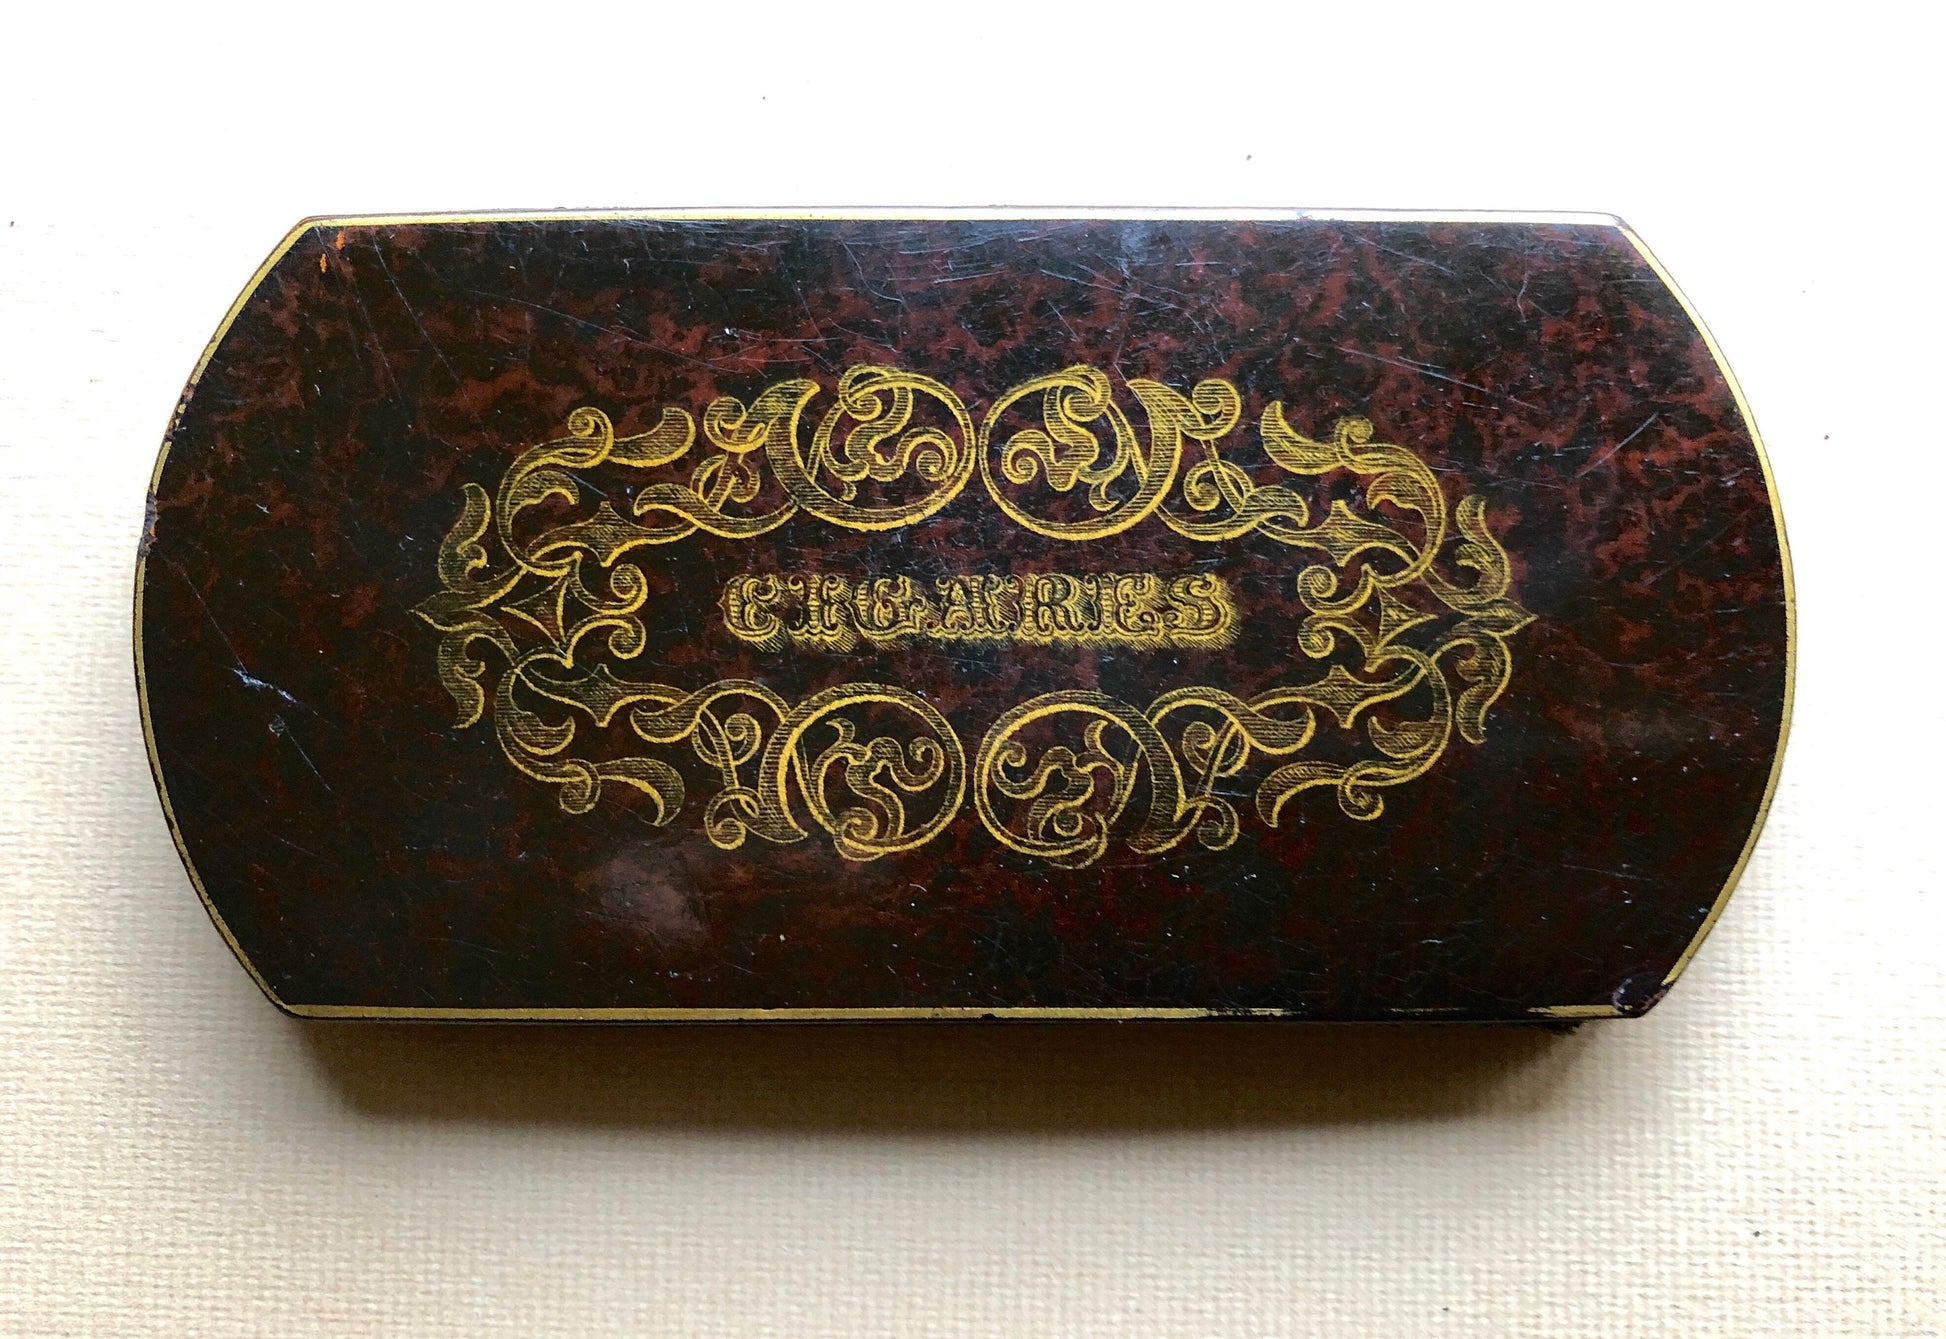 Two french Cigar Cases Featuring Original Portraits of Opera Singer Marie Persiani. 1800’s. Size: 14 x 7 cms. Very Good Condition.